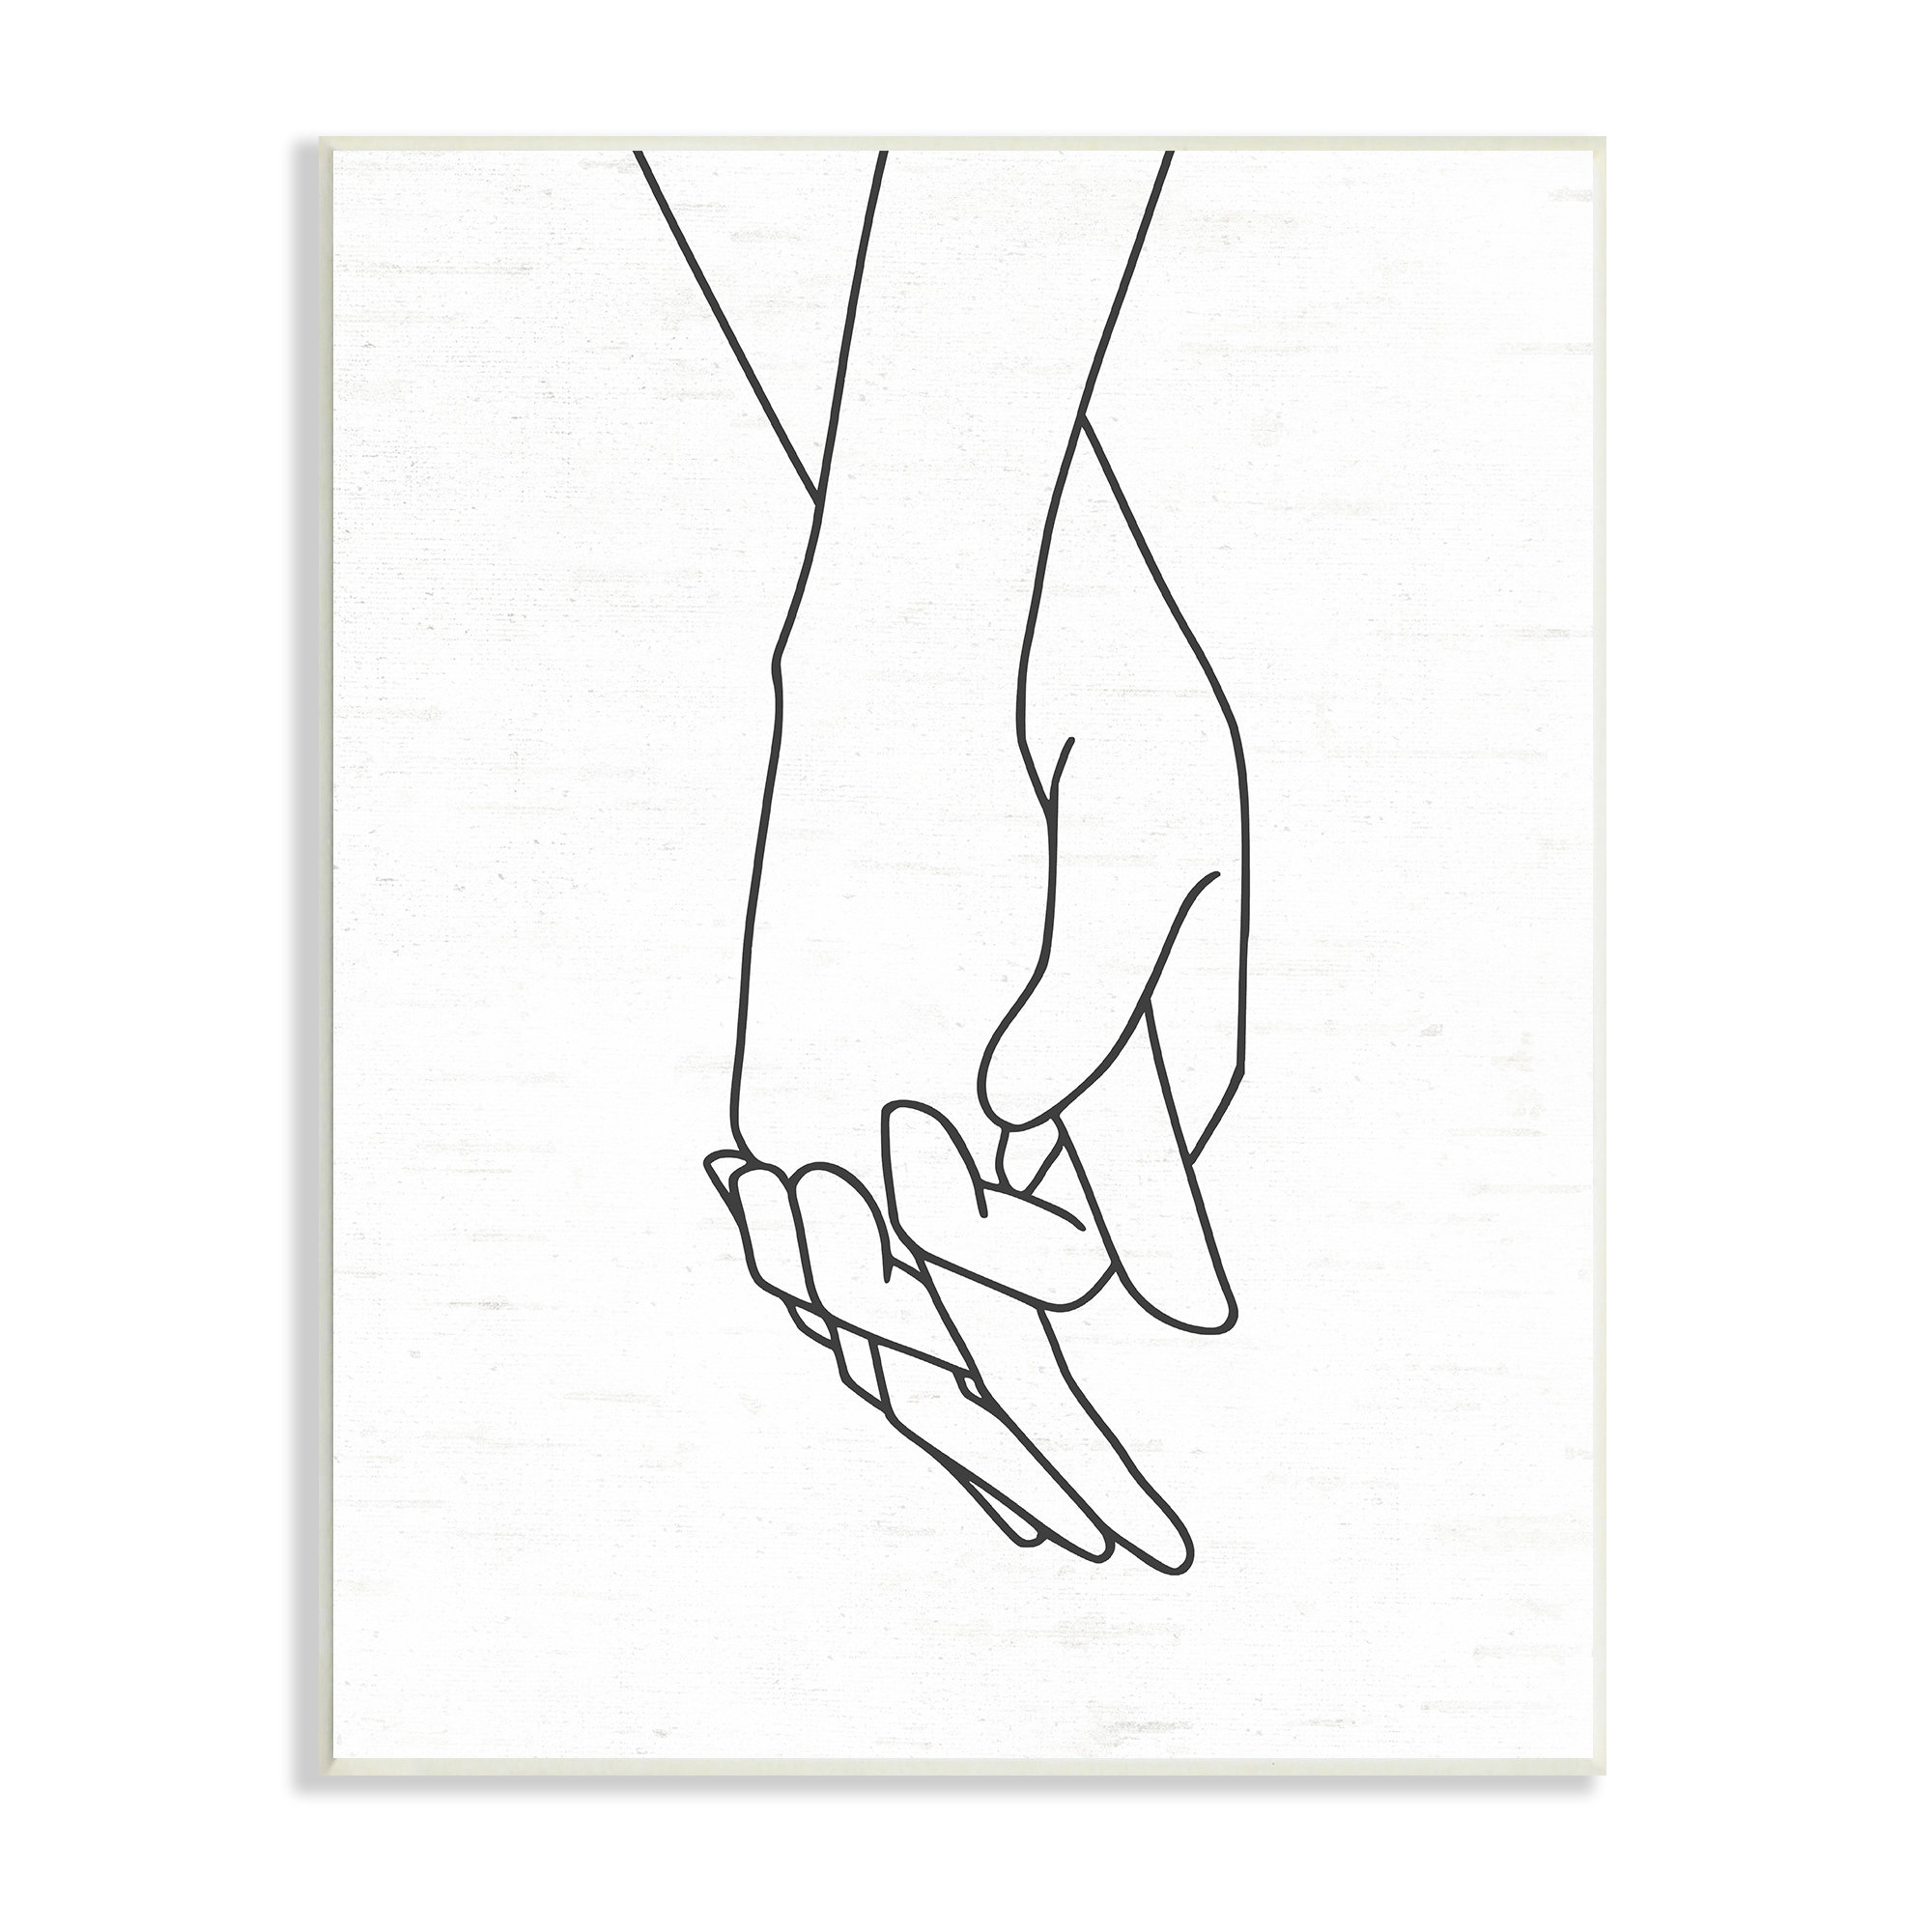 How to Draw Holding Hands - An Easy Step-by-Step Guide